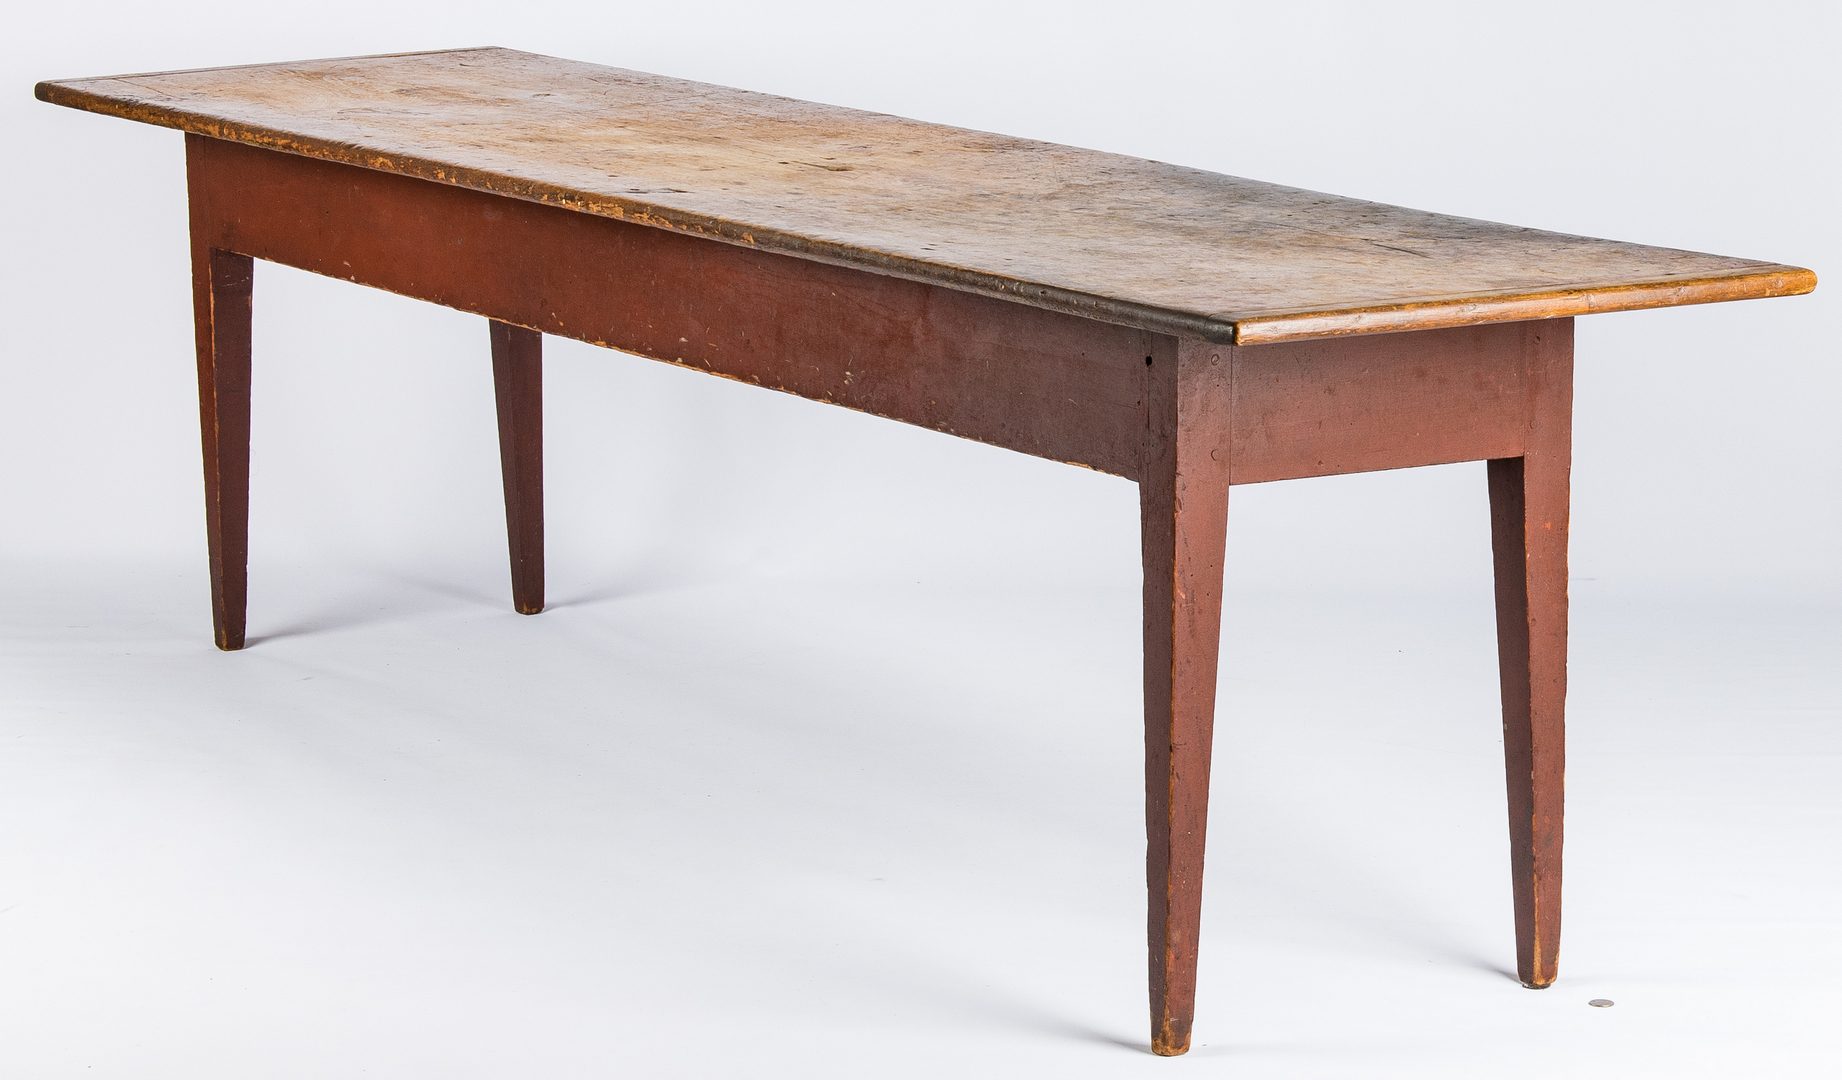 Lot 141: Mid-Atlantic or Southern Harvest Table